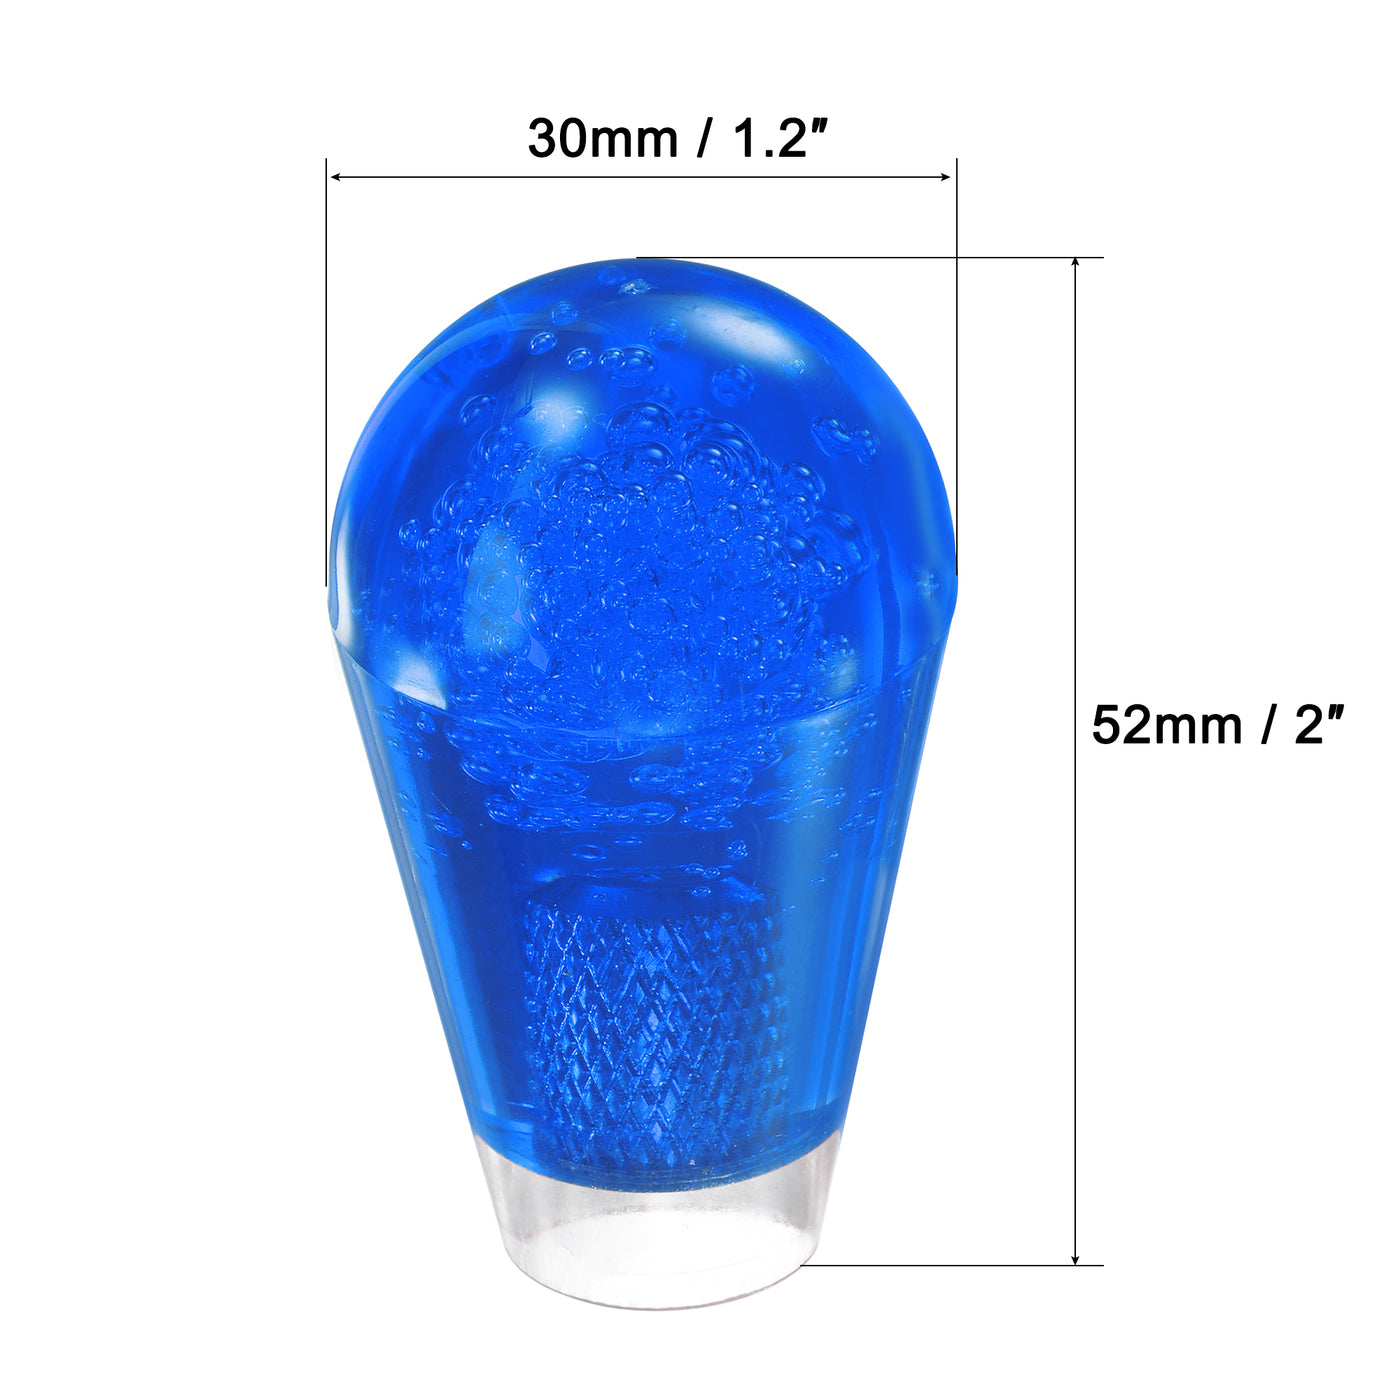 uxcell Uxcell Ellipse Oval Joystick Head Rocker Ball Top Handle Arcade Game Replacement Blue